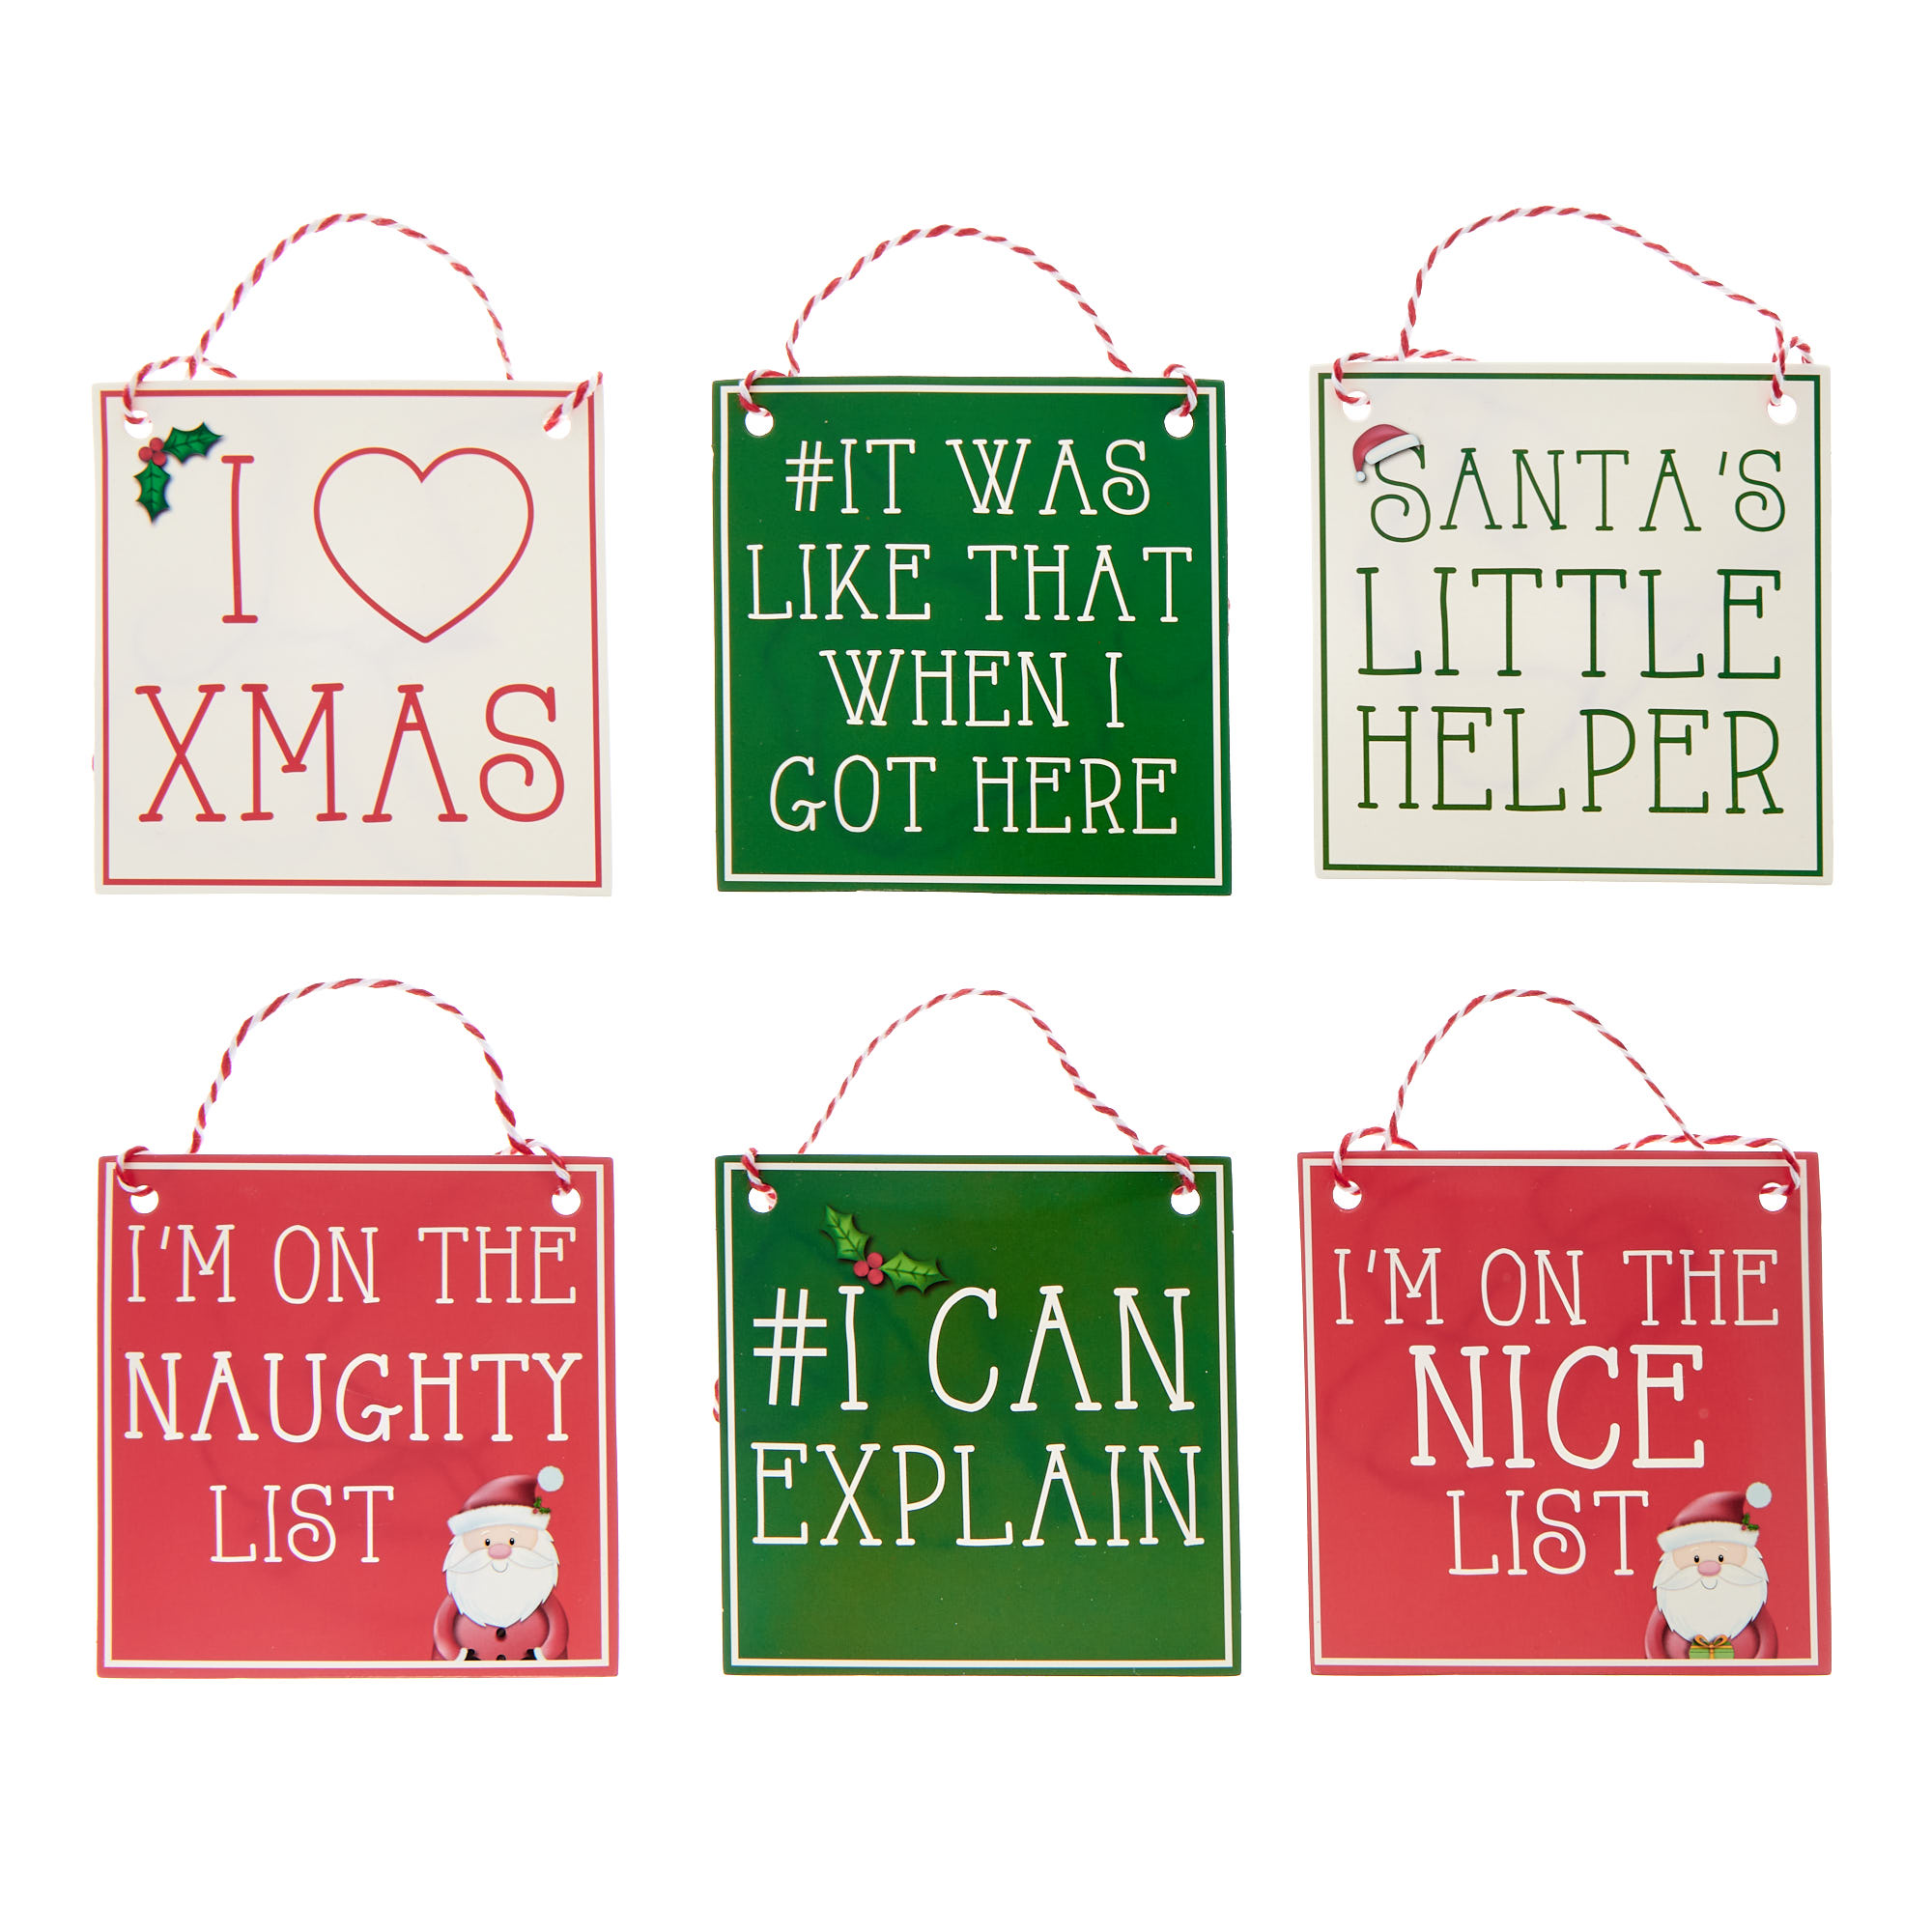 Christmas Pet Photo Props - Pack of 6